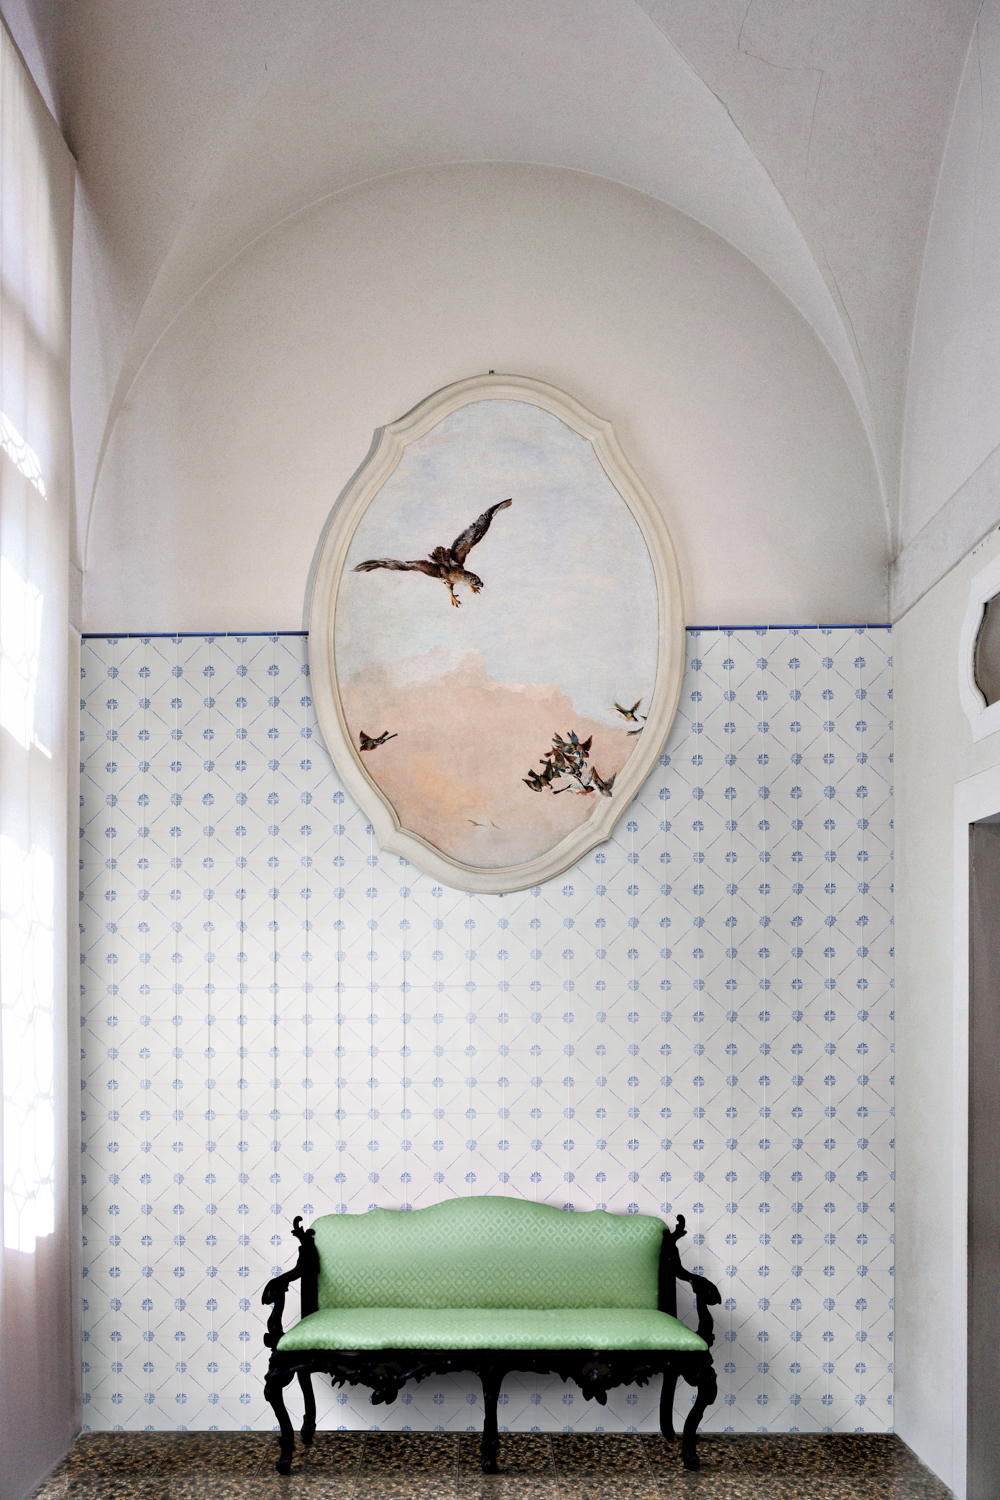 Blue and white tiled wall with oval framed artwork of birds and green bench